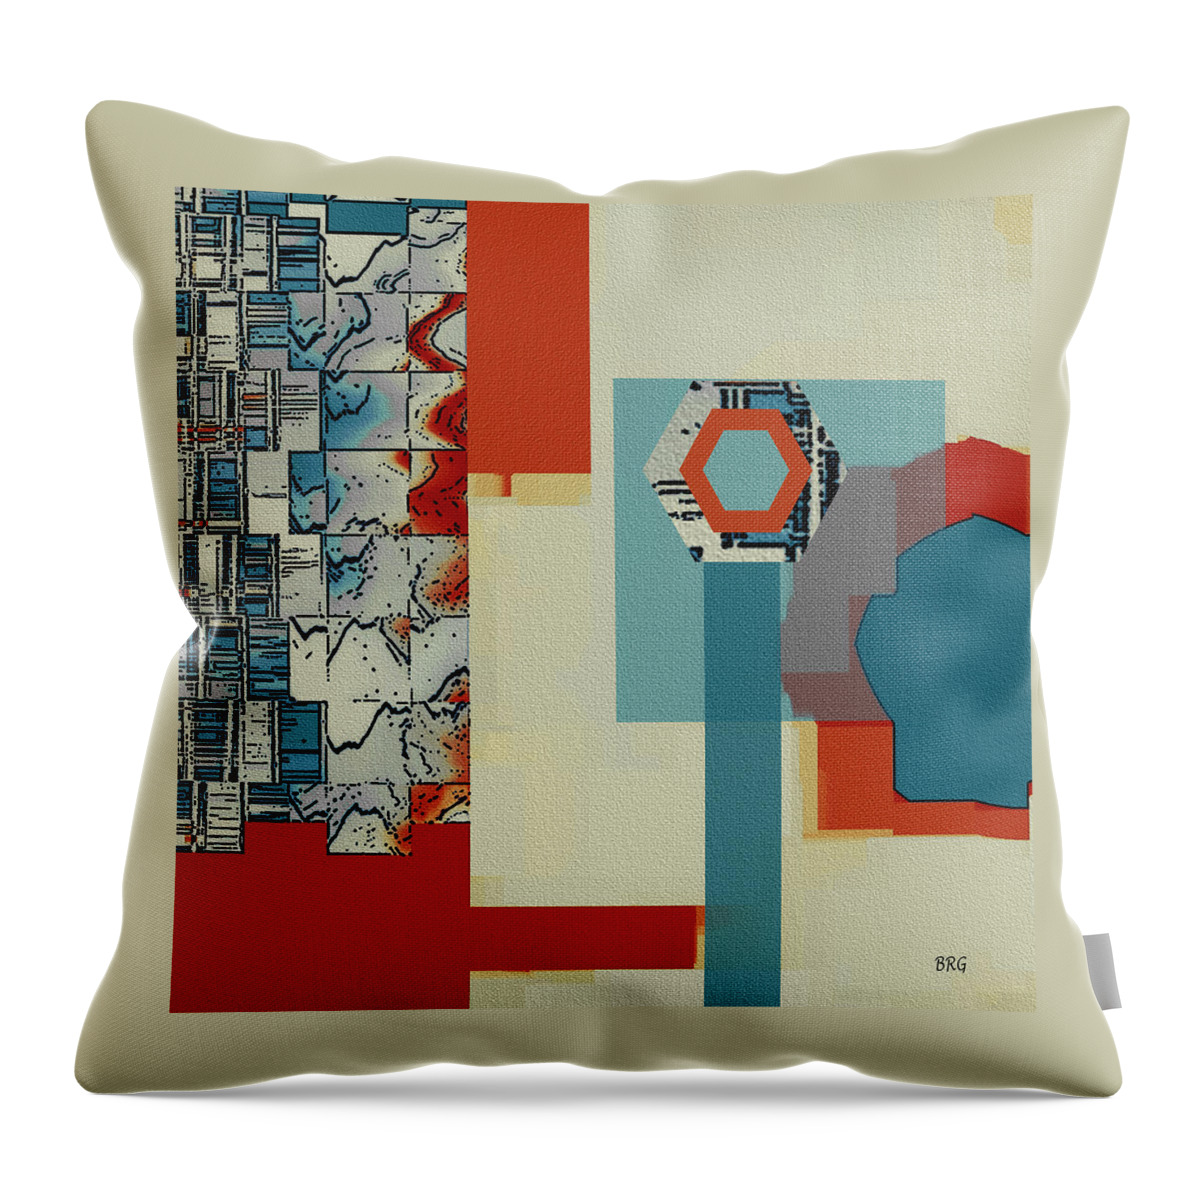 Geometric Abstract Throw Pillow featuring the digital art Moving Parts No 1 by Ben and Raisa Gertsberg